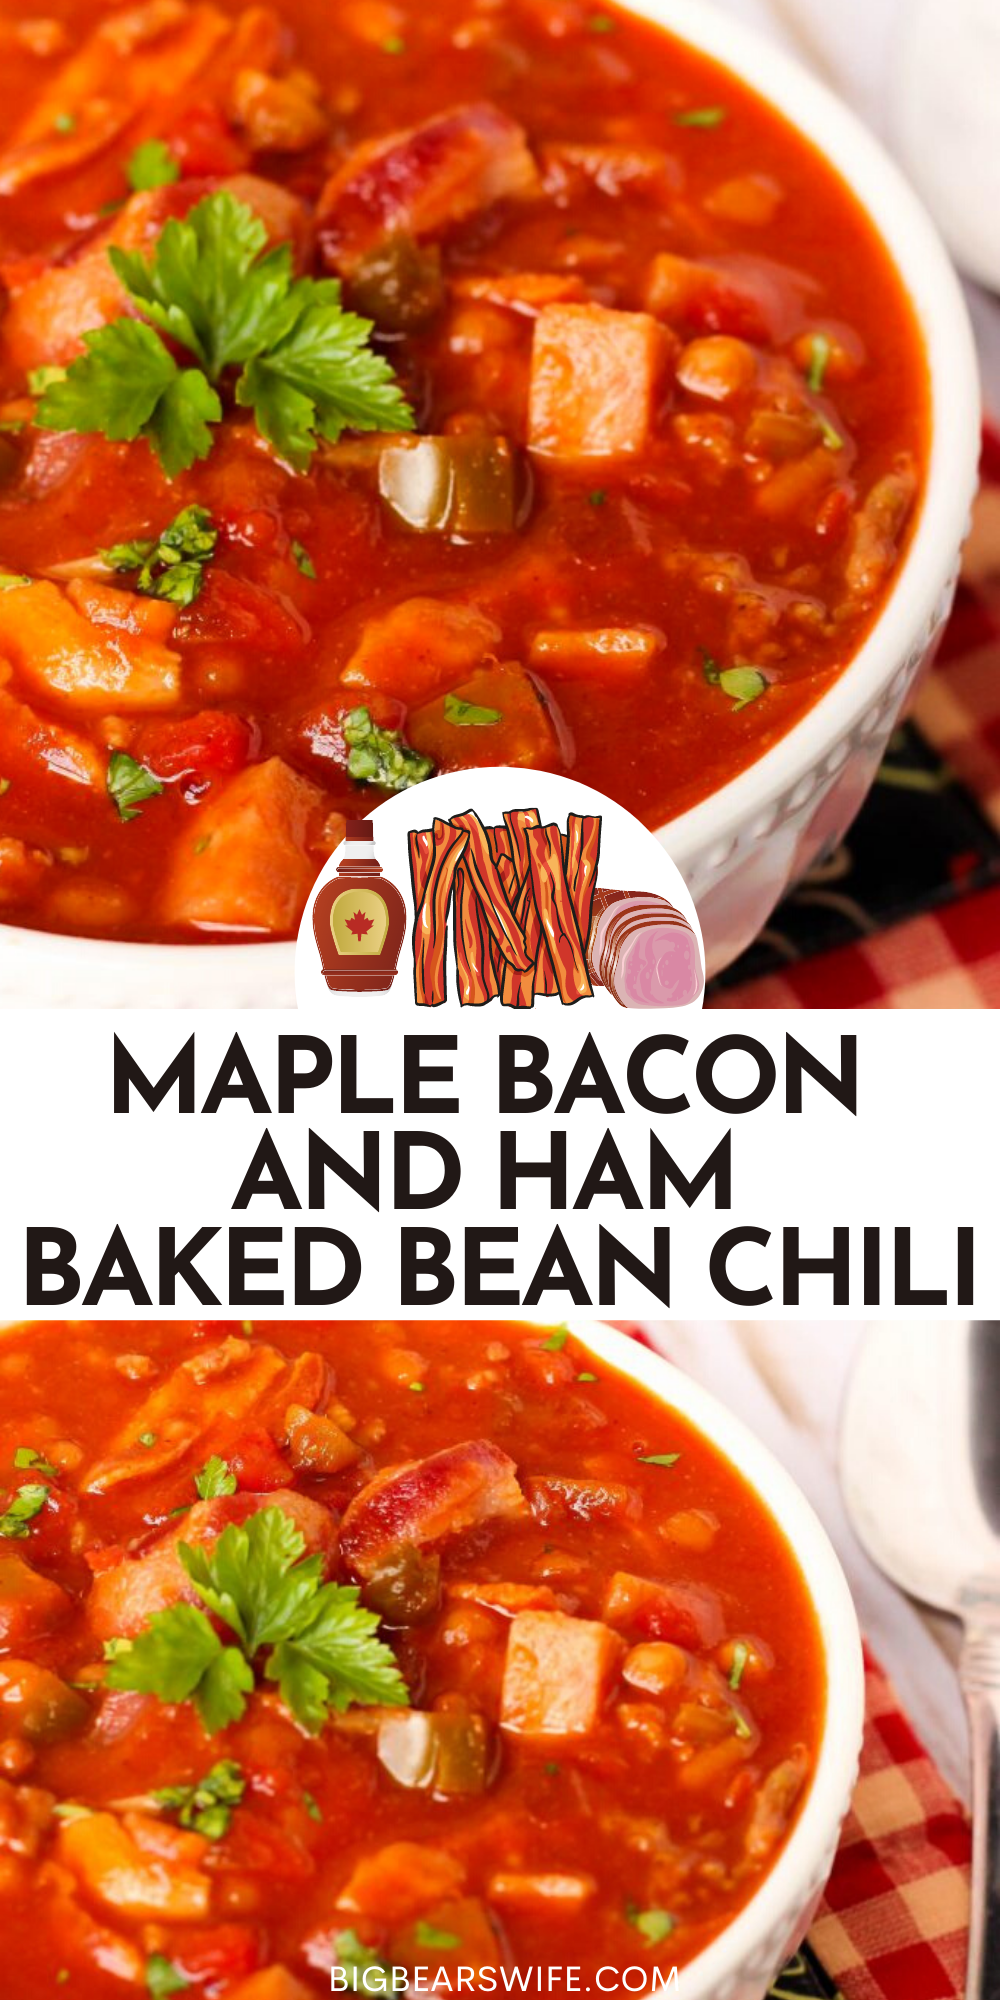 Maple Bacon and Ham Baked Bean Chili - This Maple Bacon and Ham Baked Bean Chili is a nod to my home in Virginia and the flavors that come from around the state. This will warm you up! BigBearsWife fans LOVE this tasty fall recipe! Click the photo to grab the recipe! Maple, Bacon and Chili is amazing together! You'll love this! There are more fall recipes on the blog too!  via @bigbearswife